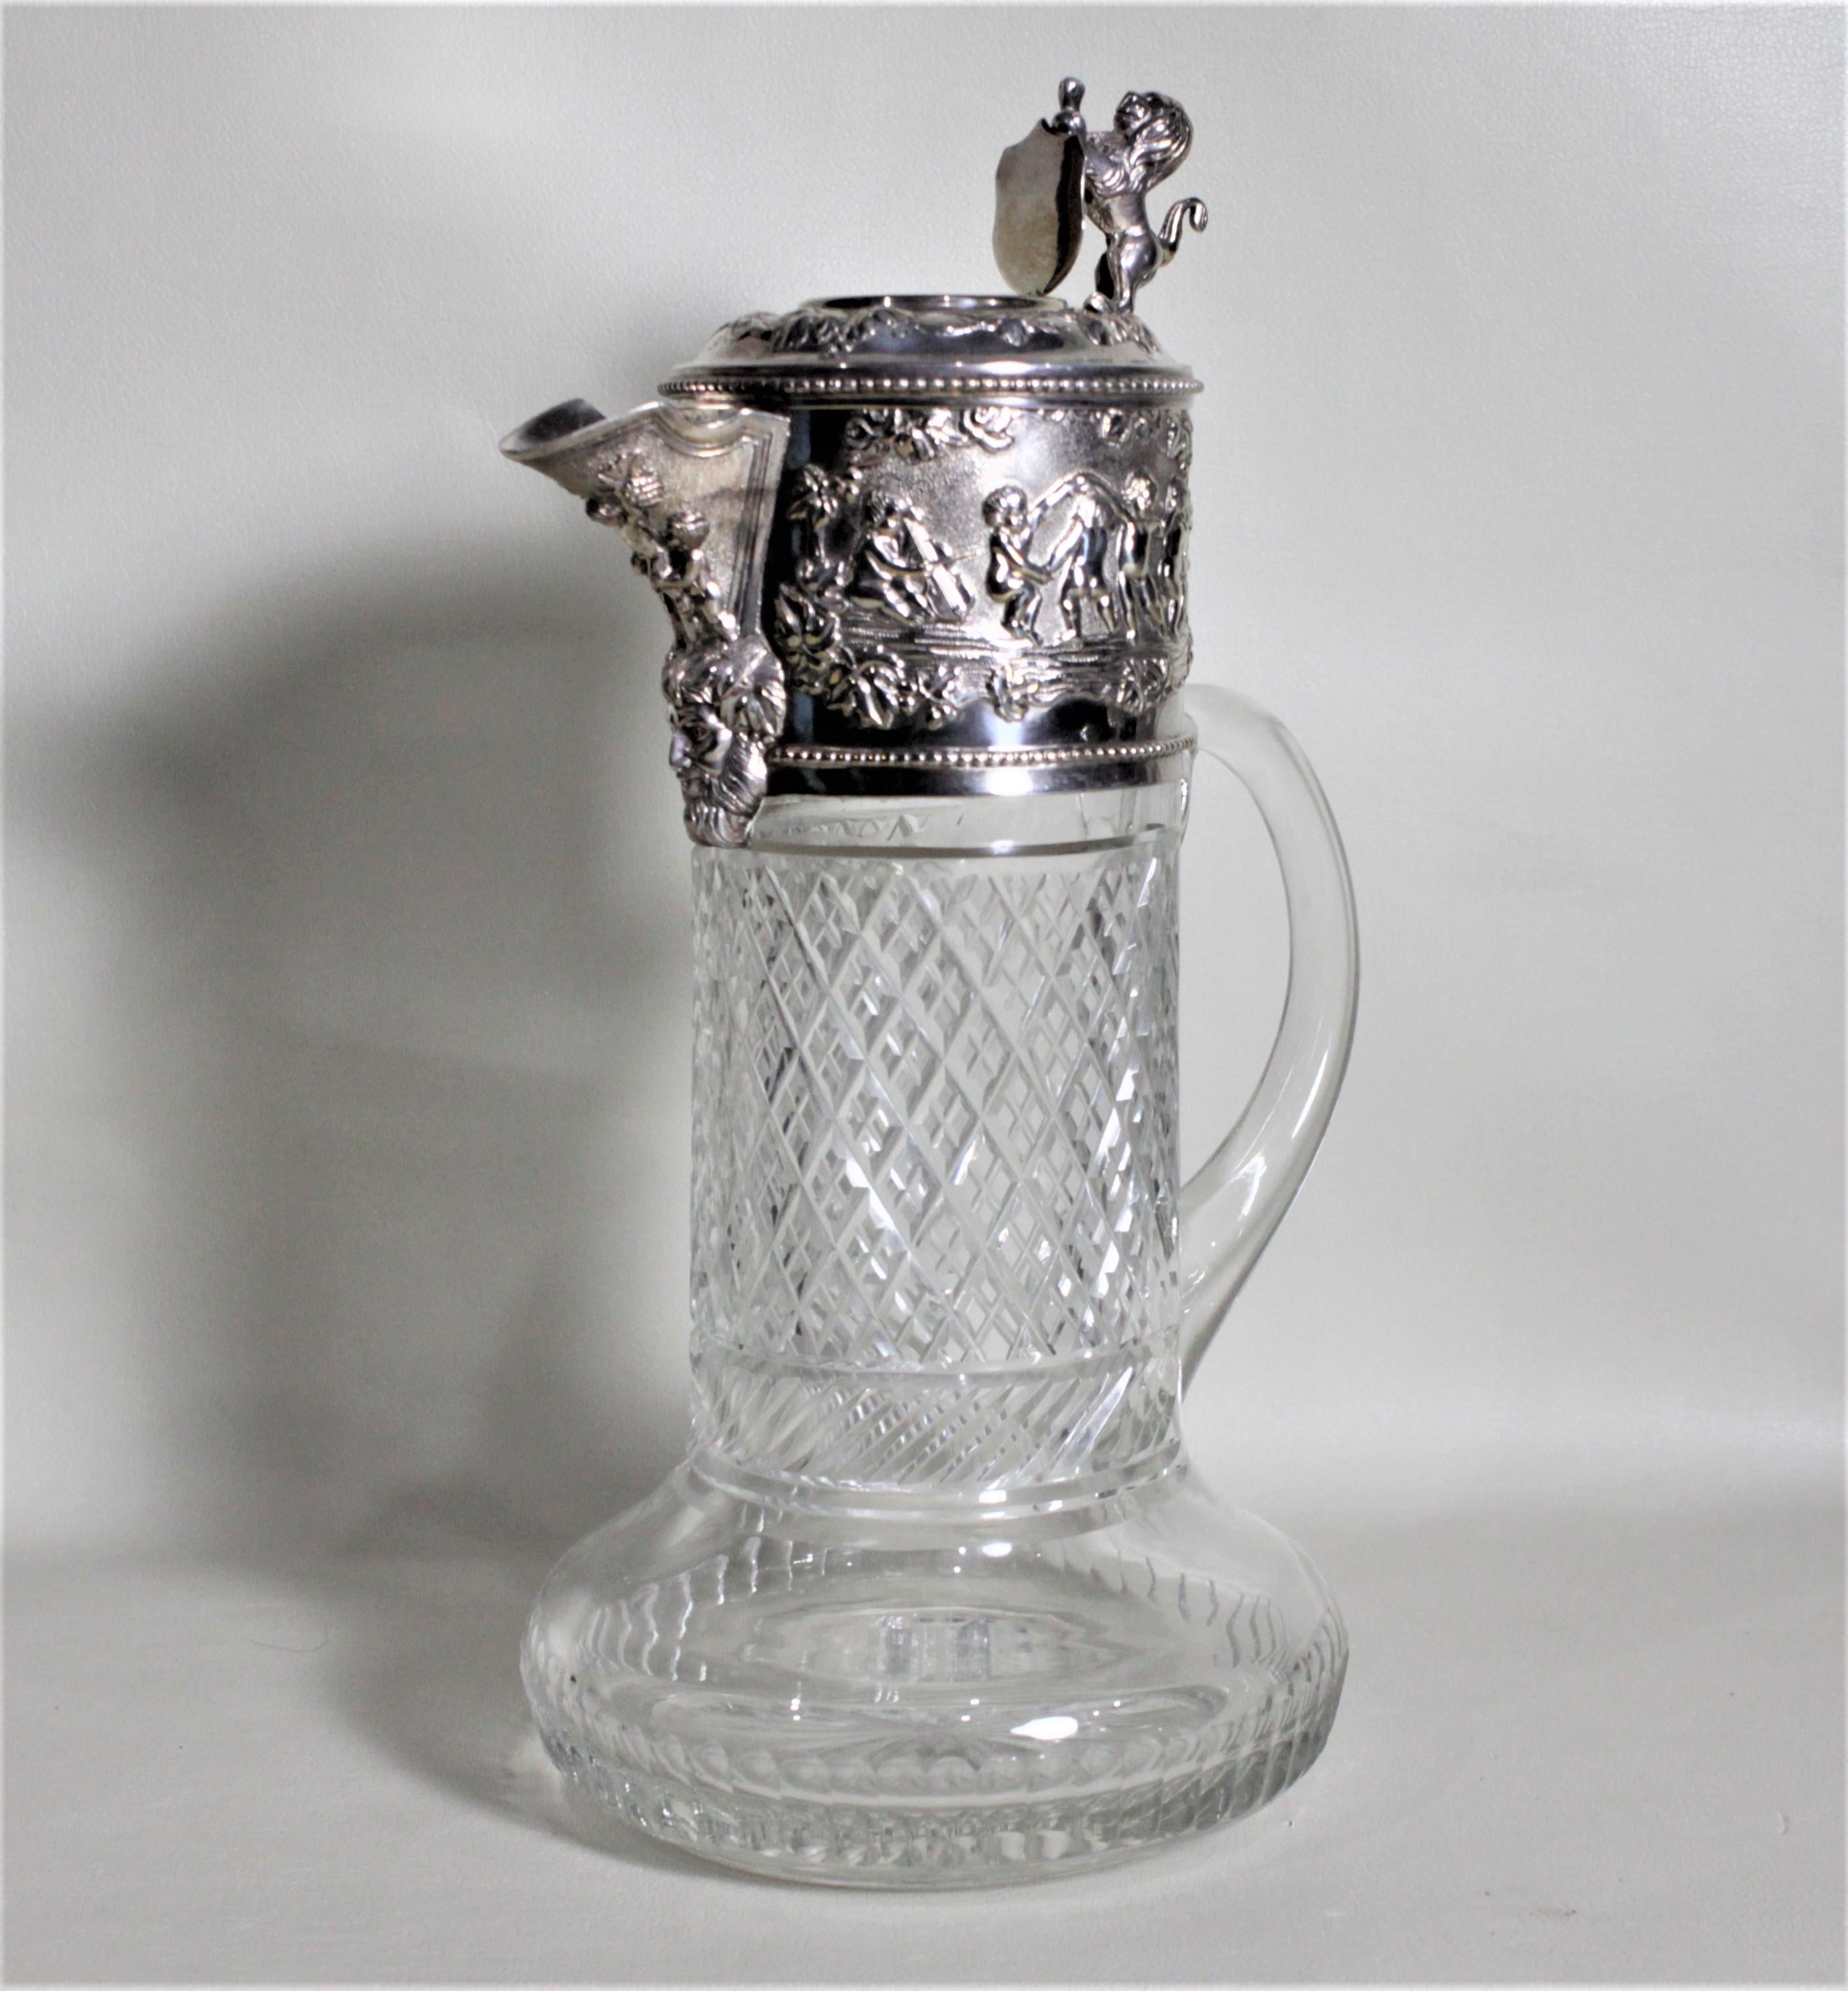 This antique silver plate and cut glass claret jug was most likely made in England in circa 1900 in the Victorian style. The jug features a rearing figural lion finial on the lid and a very ornate raised cherub motif decoration on the wide banding